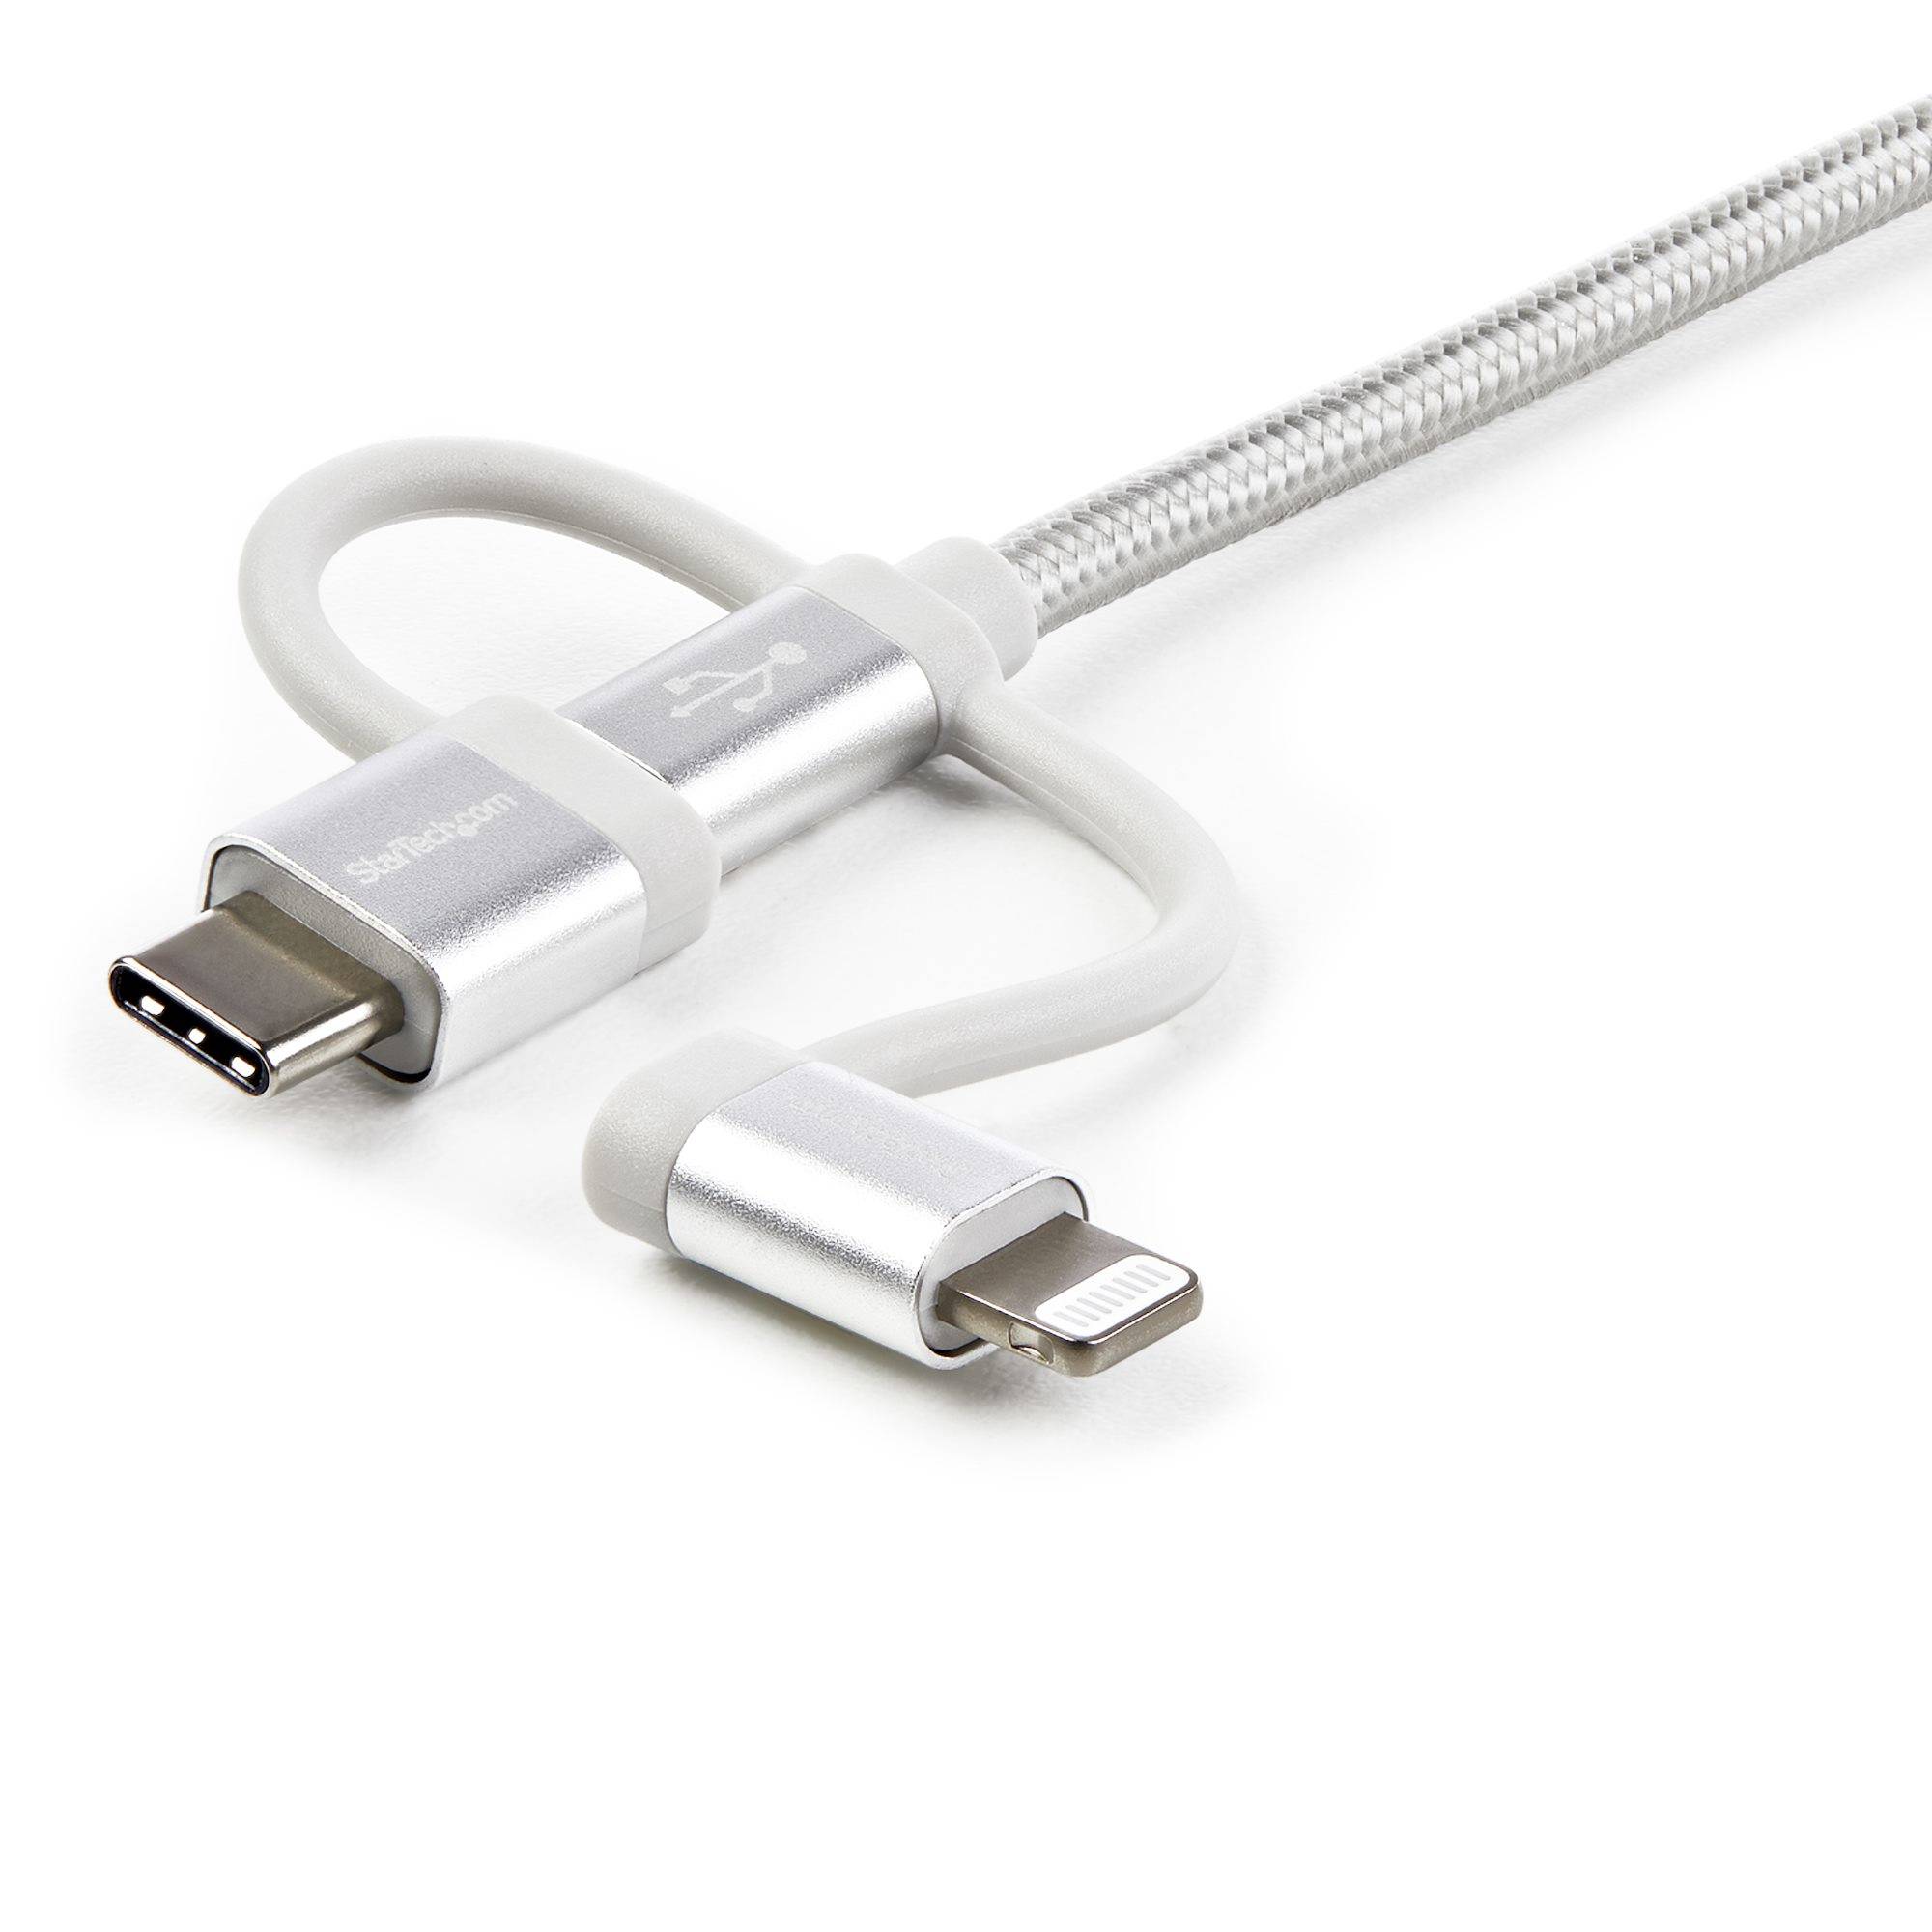 Rca Informatique - image du produit : 1M 3 IN 1 CHARGER - LIGHTNING USB C OR MICRO-USB - BRAIDED